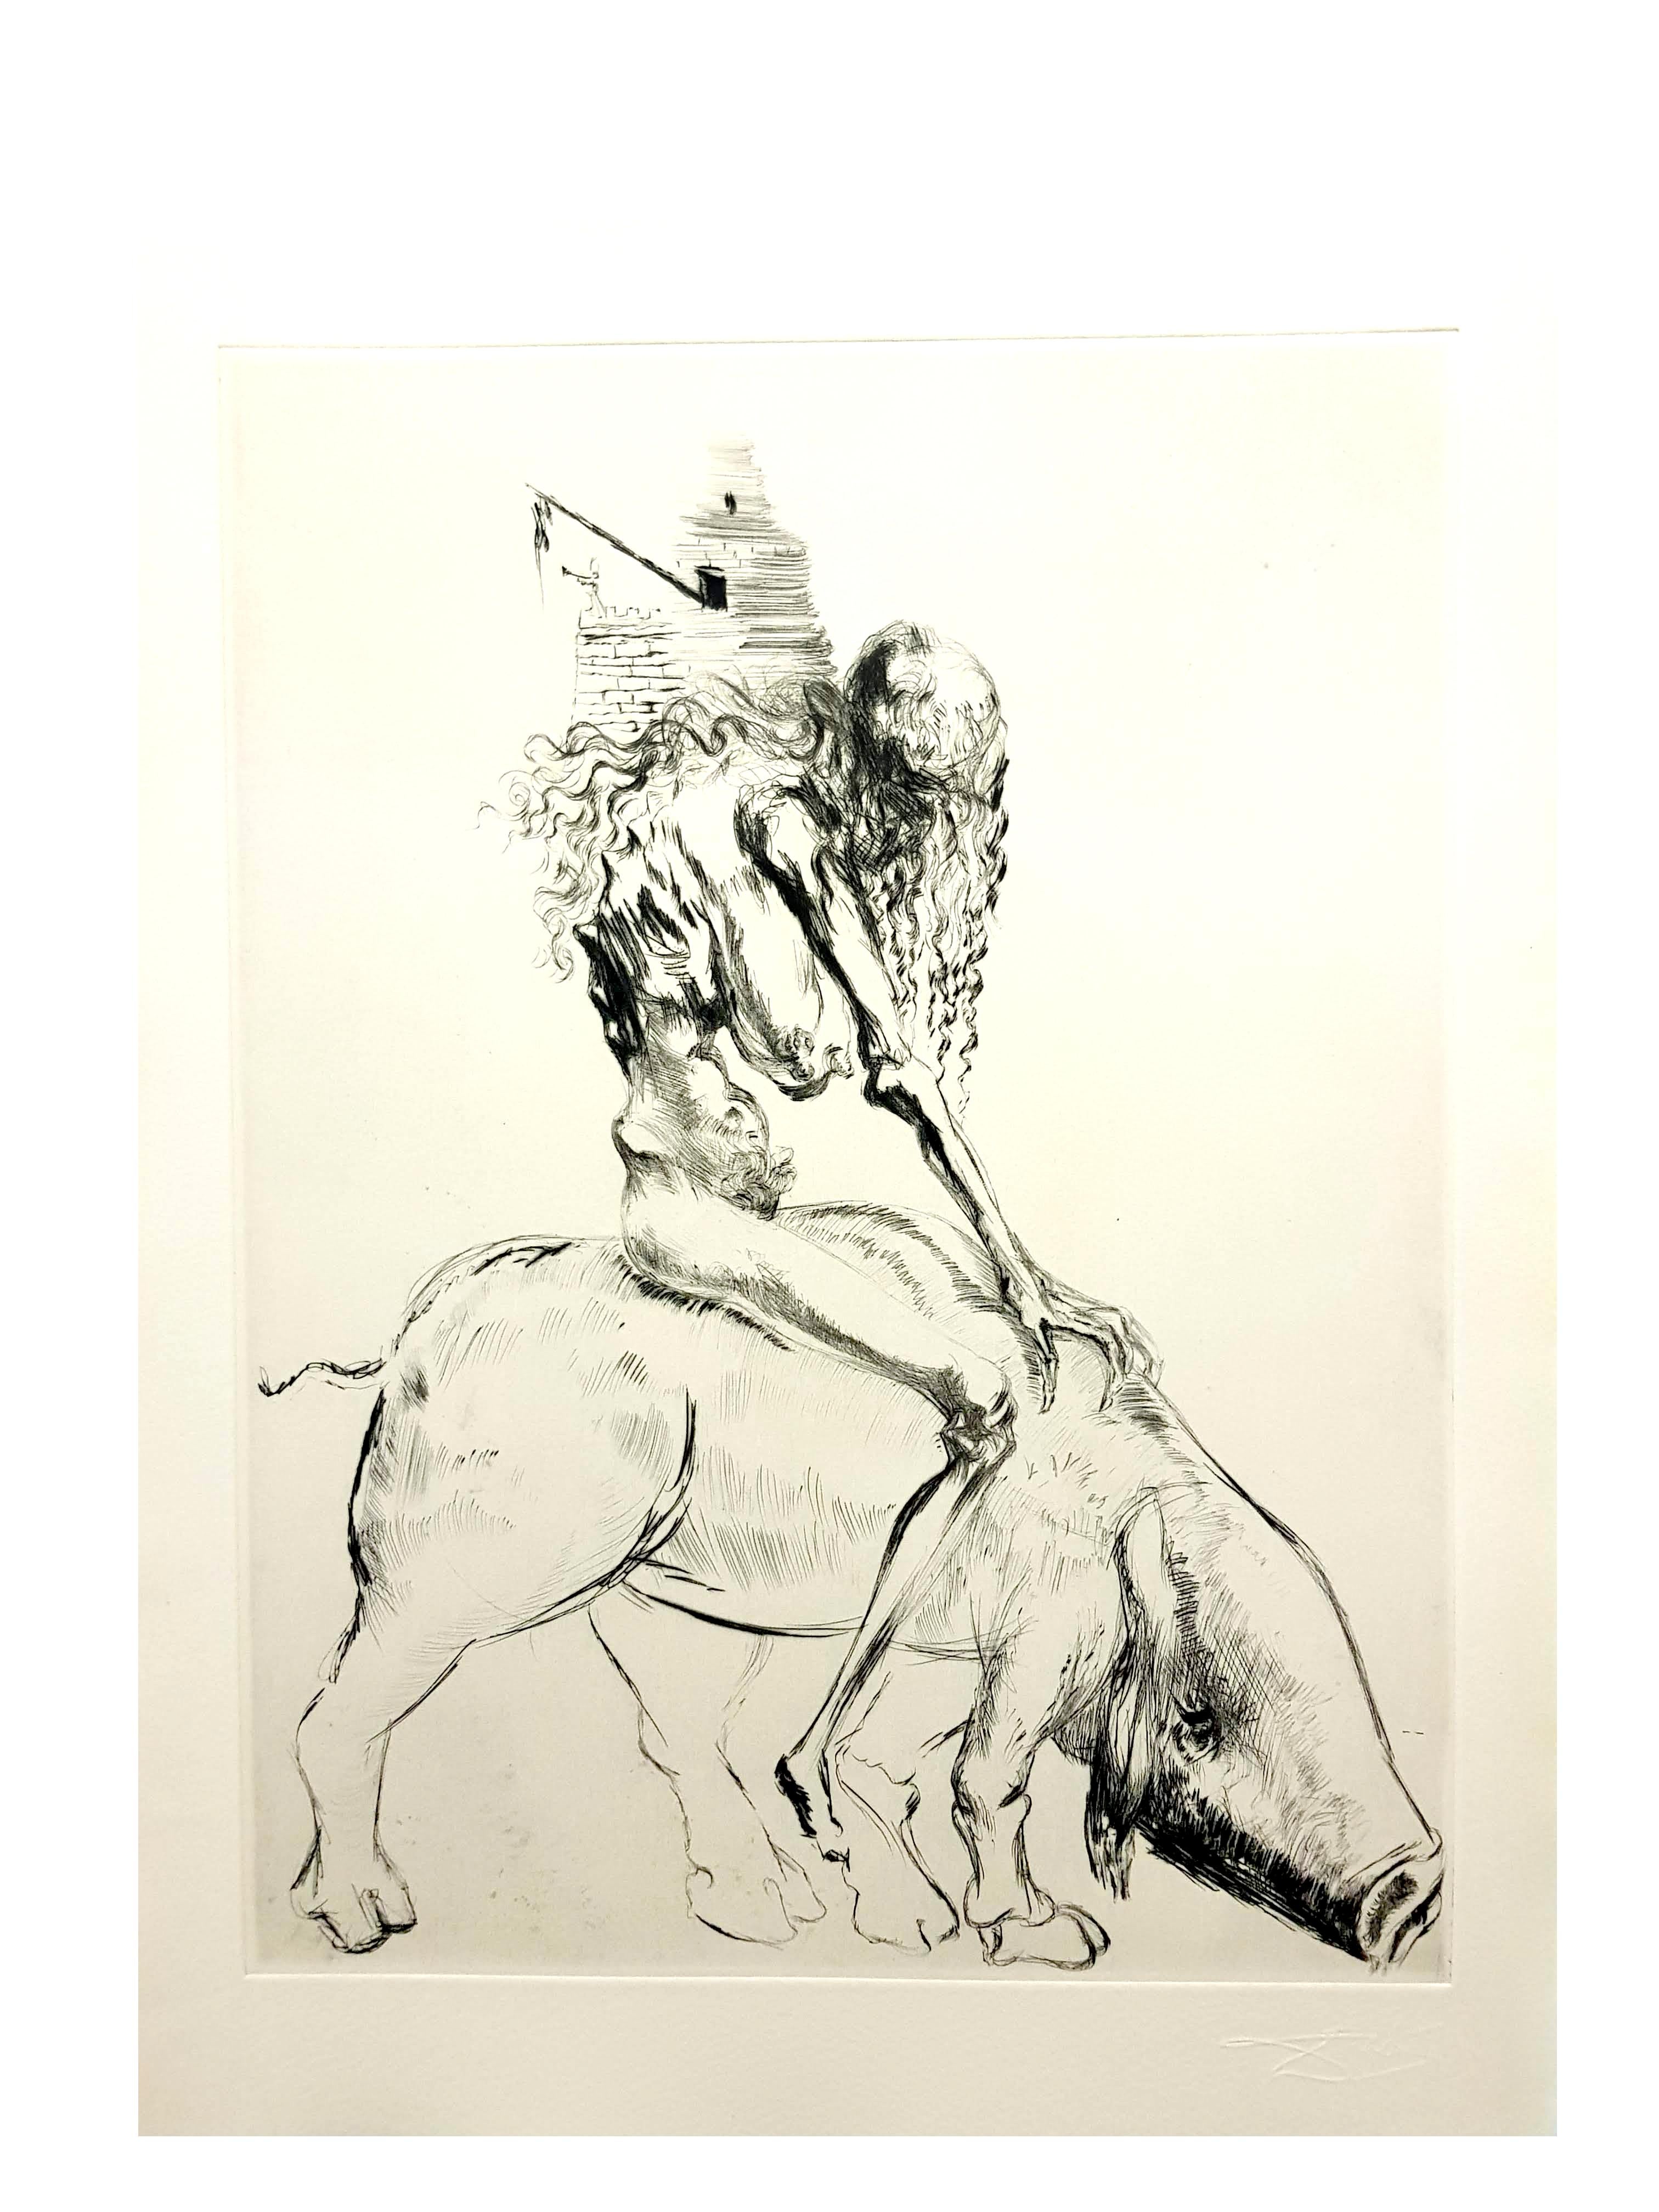 Salvador Dali - Baubo (Woman Riding a Sow), from Faust
Embossed signature (from the standard book edition of 731)
Dimensions: 38,5 x 28,5 cm
1969
References : Field 69-1 B / Michler & Lopsinger 305
